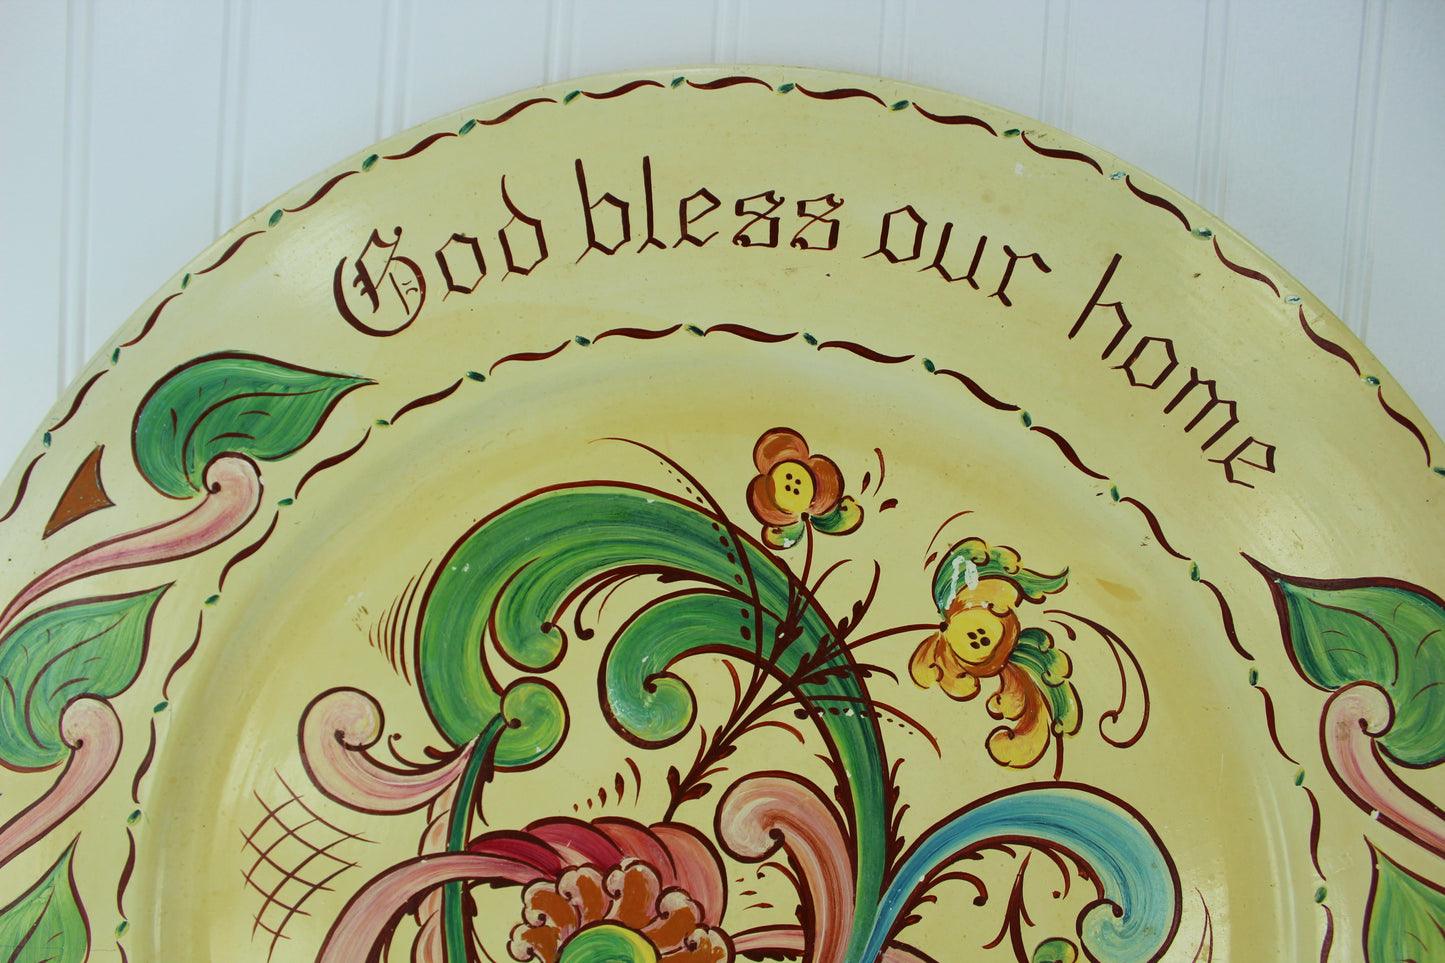 Rosemaled Wood Plate 20" Eleanor Erickson St Paul MN signed Solhaug Student Per Lysne inscribed God Bless Our Home